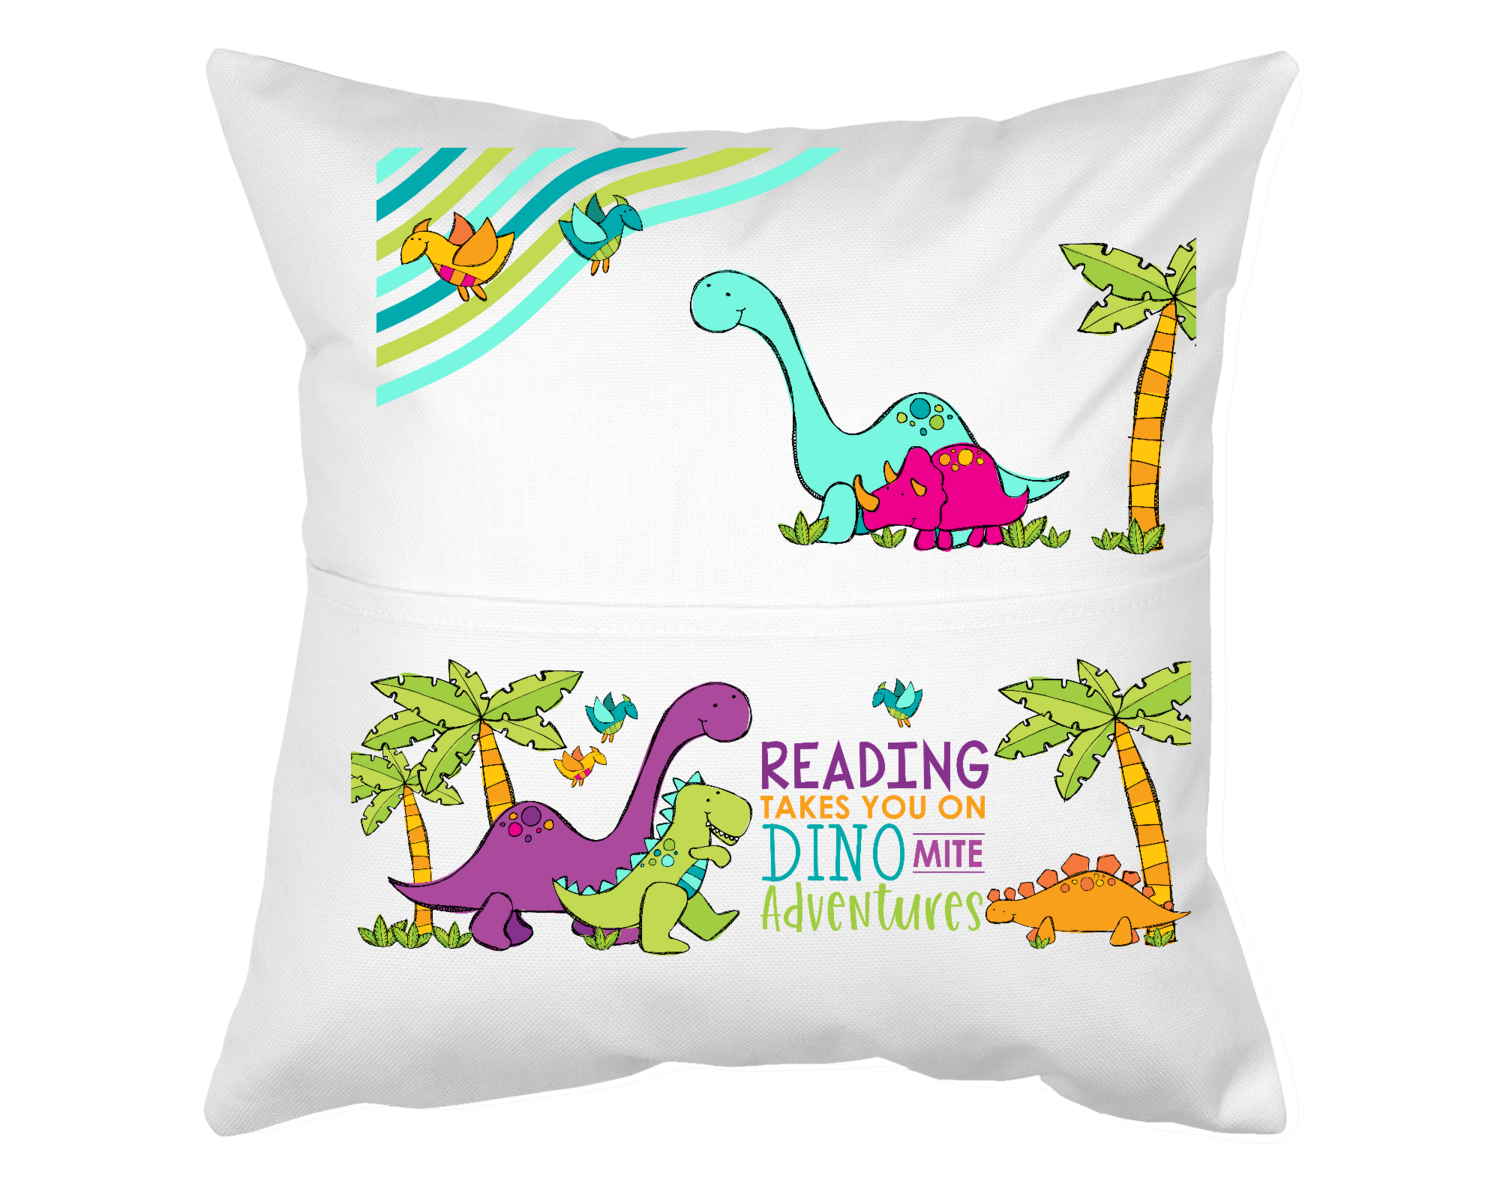 Pillow with Pocket: READING TAKES YOU ON A DINO-MITE ADVENTURES